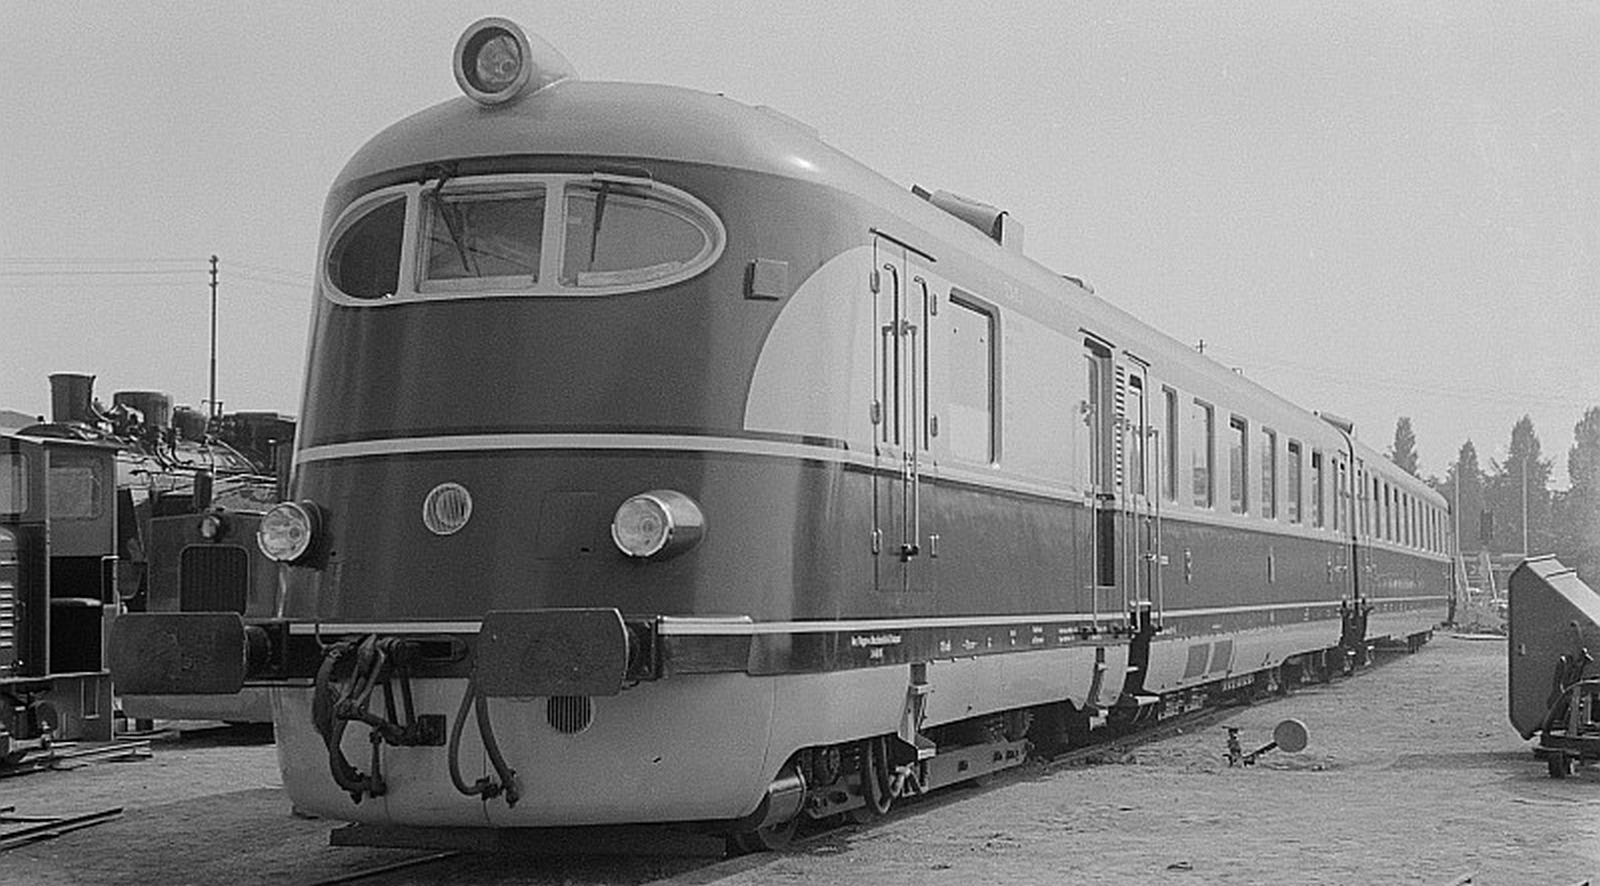 One of the trains exhibited at the Leipzig Autumn Fair in 1954